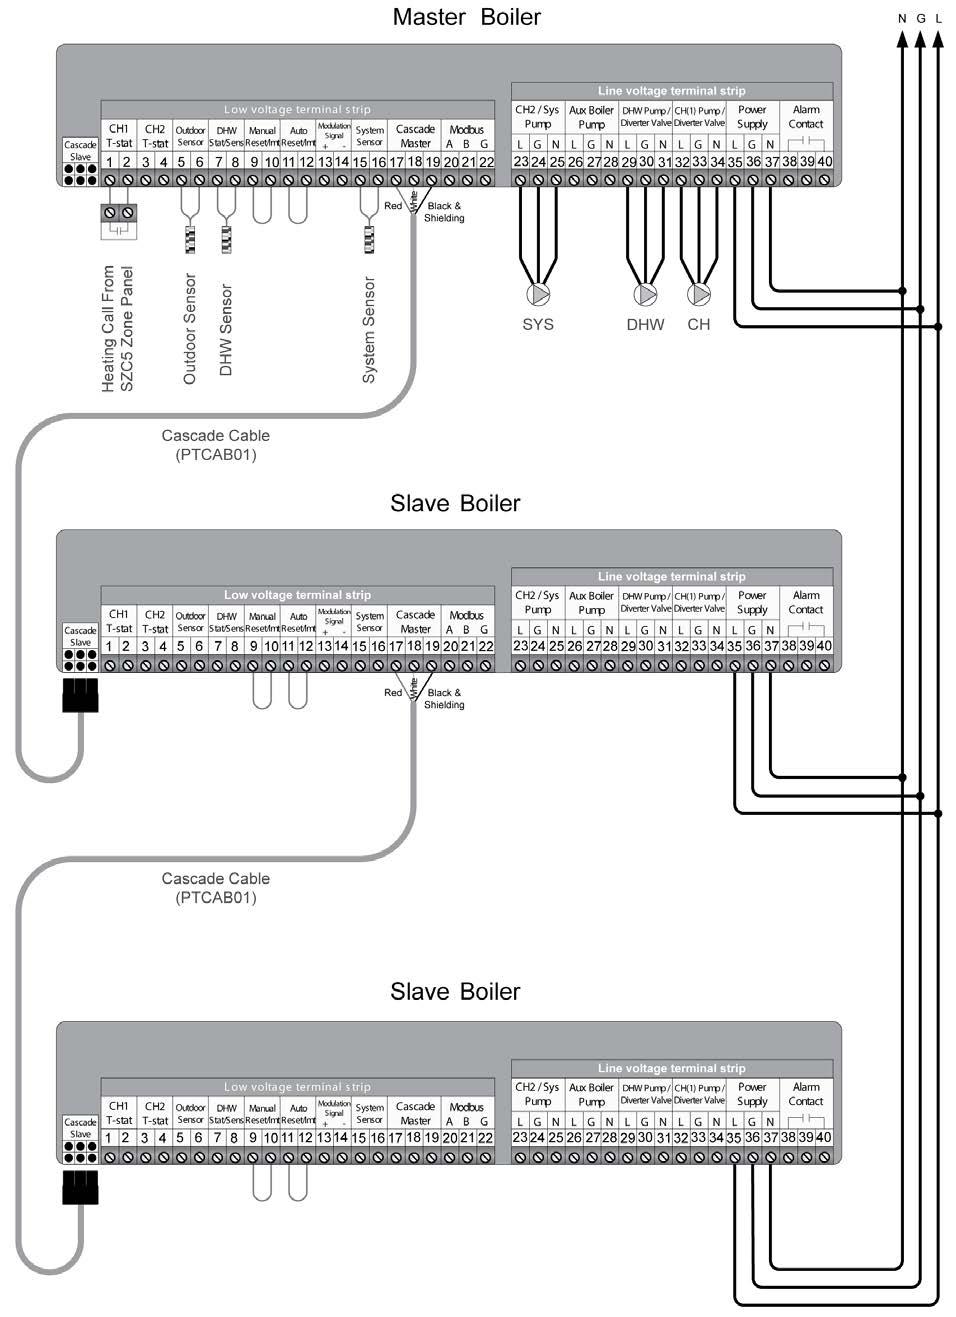 GF-135 Esteem 399 Low NOx Boiler Chapter 18 OMM-0089_0A Installation, Operation & Maintenance Manual Controller Operation NOTE Reference Figure 18-49 on previous